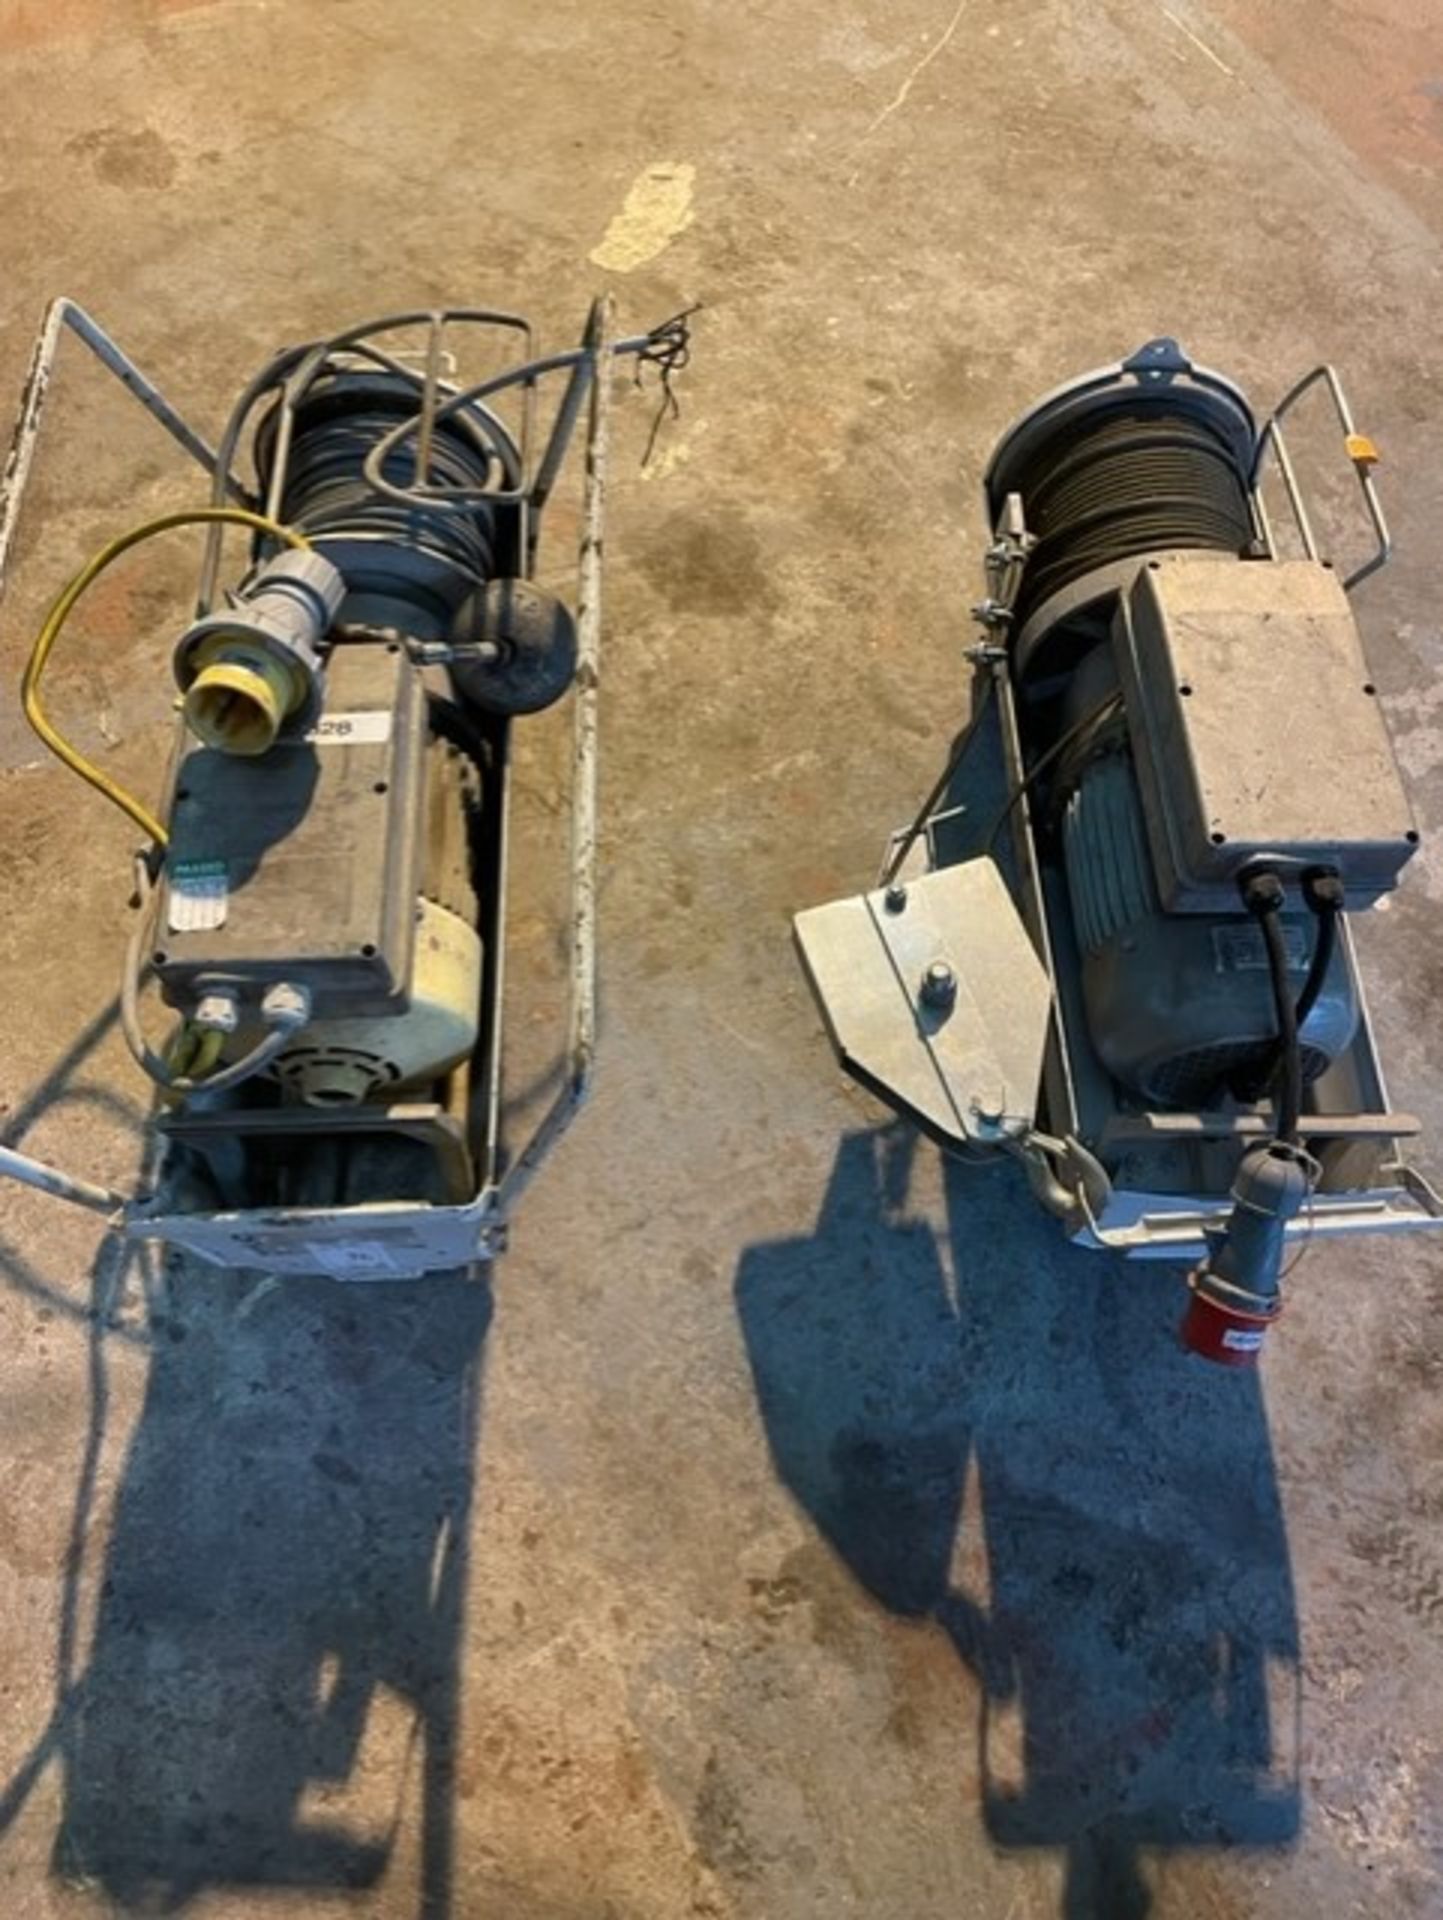 2 x gantry hoists in need of attention one is 110 the other is 415 volts one has pulley - Image 2 of 4